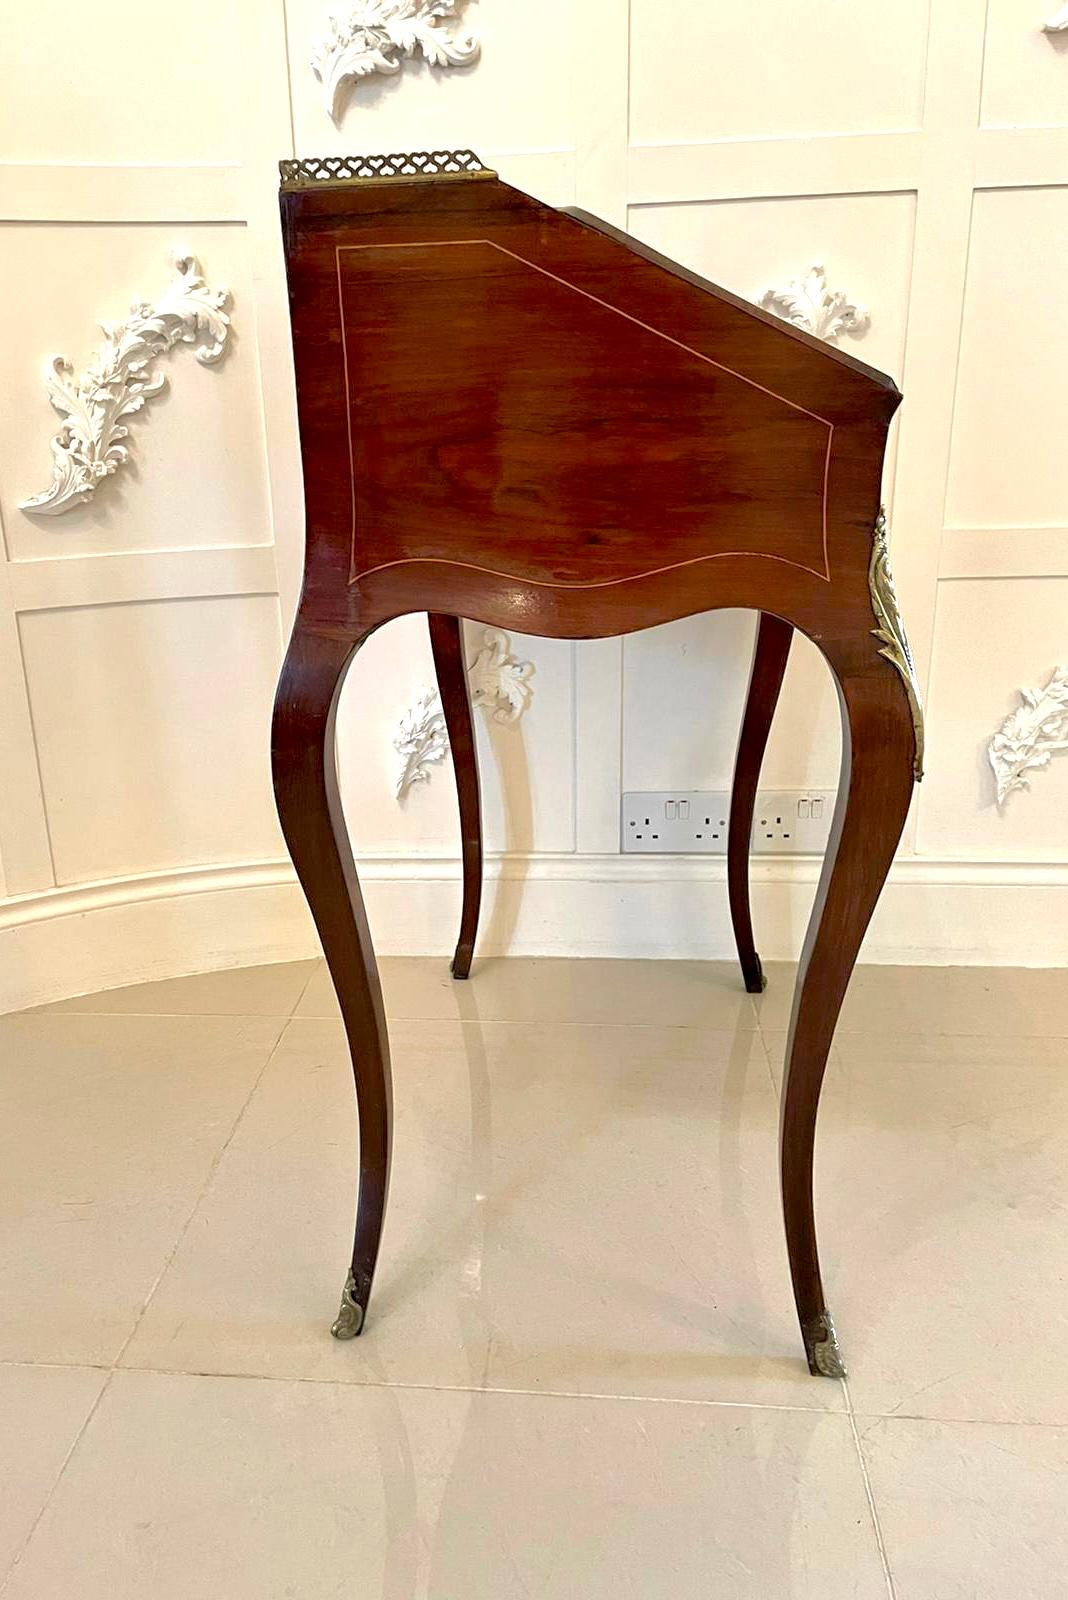  Antique Victorian French Inlaid Rosewood Freestanding Bureau/Desk For Sale 1